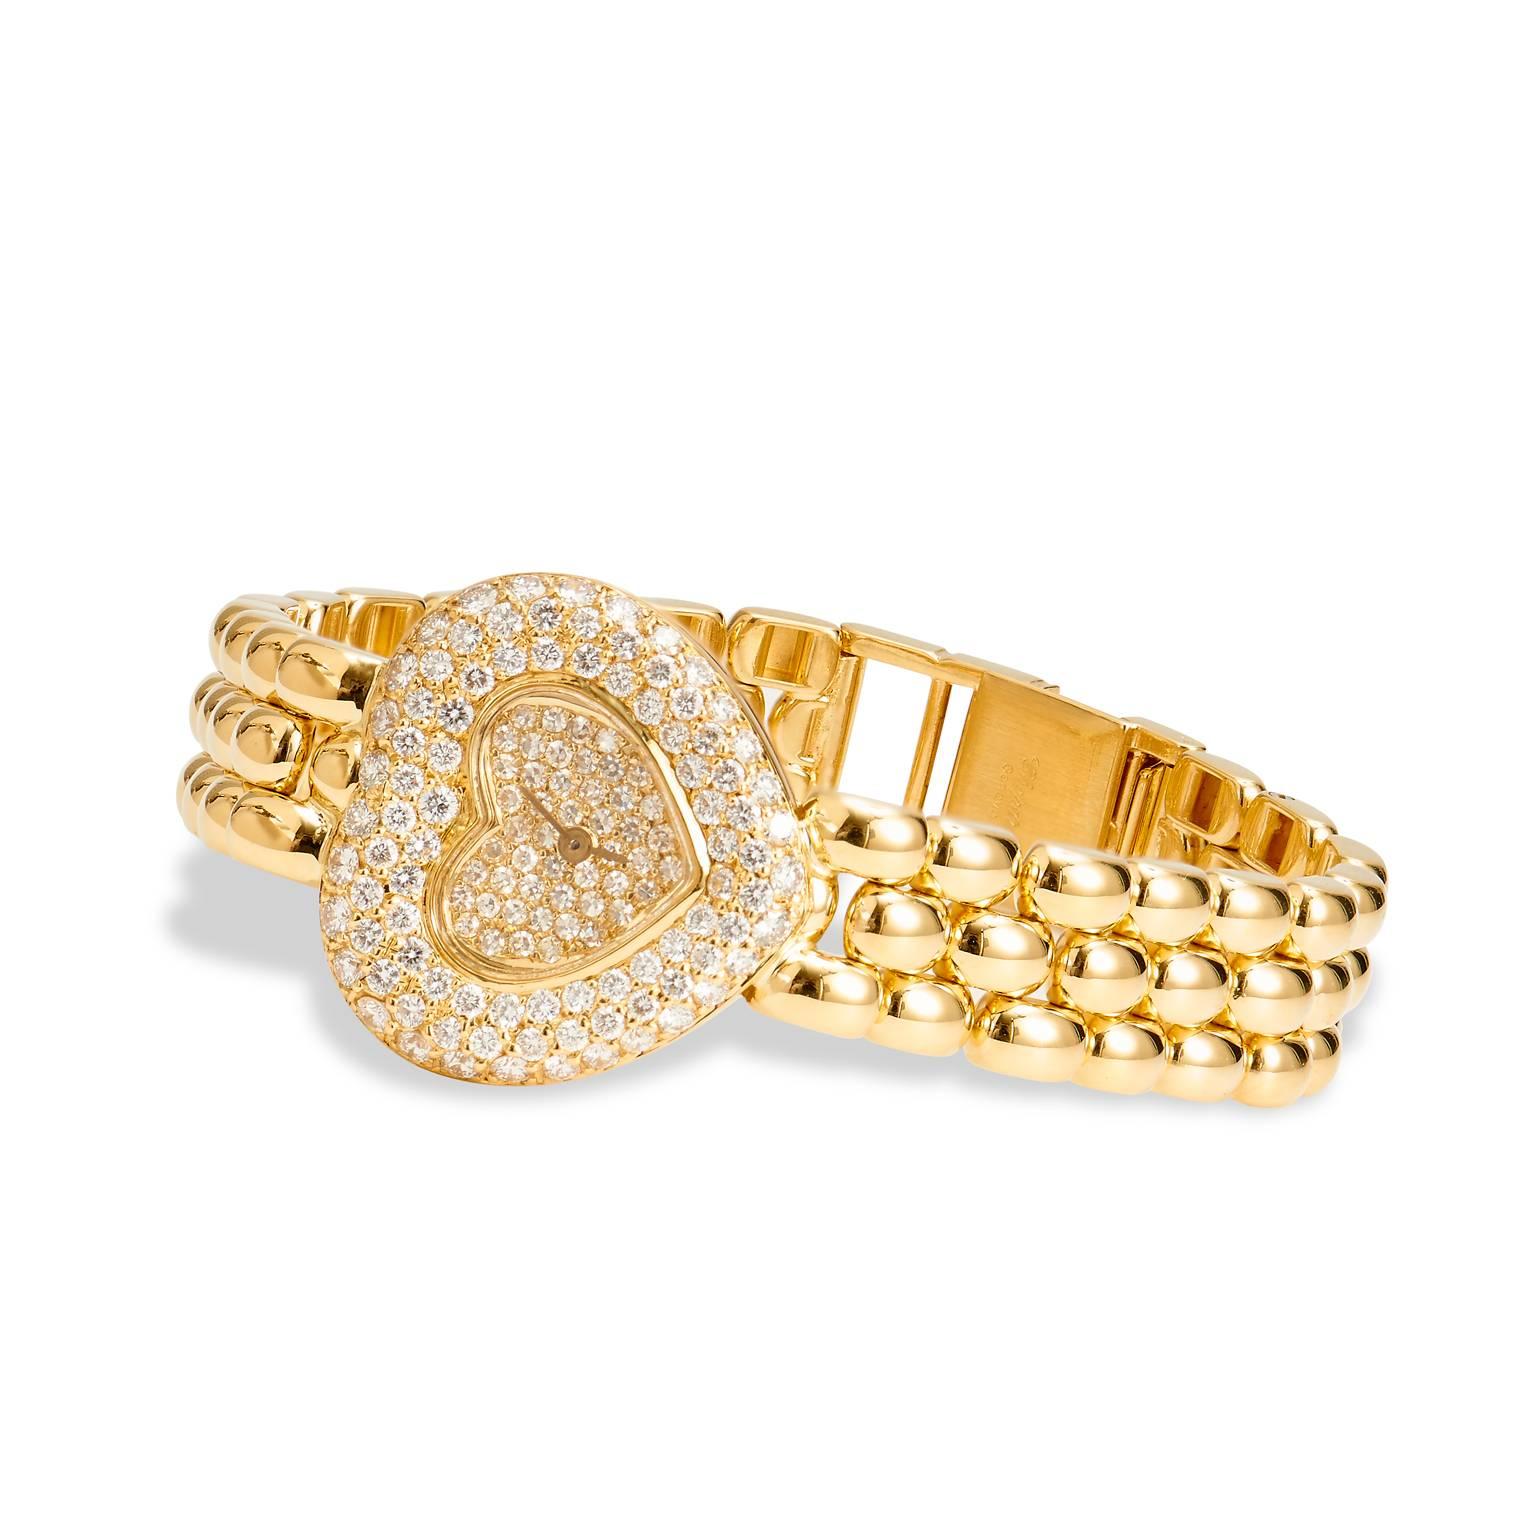 Crafted 18kt yellow gold, this classic Chopard ladies heart watch features 1.48ct of diamonds. Its serial #435600DO1 and Reference #105550-001. New list retail for this watch is $30,890. Our price is $15,595.